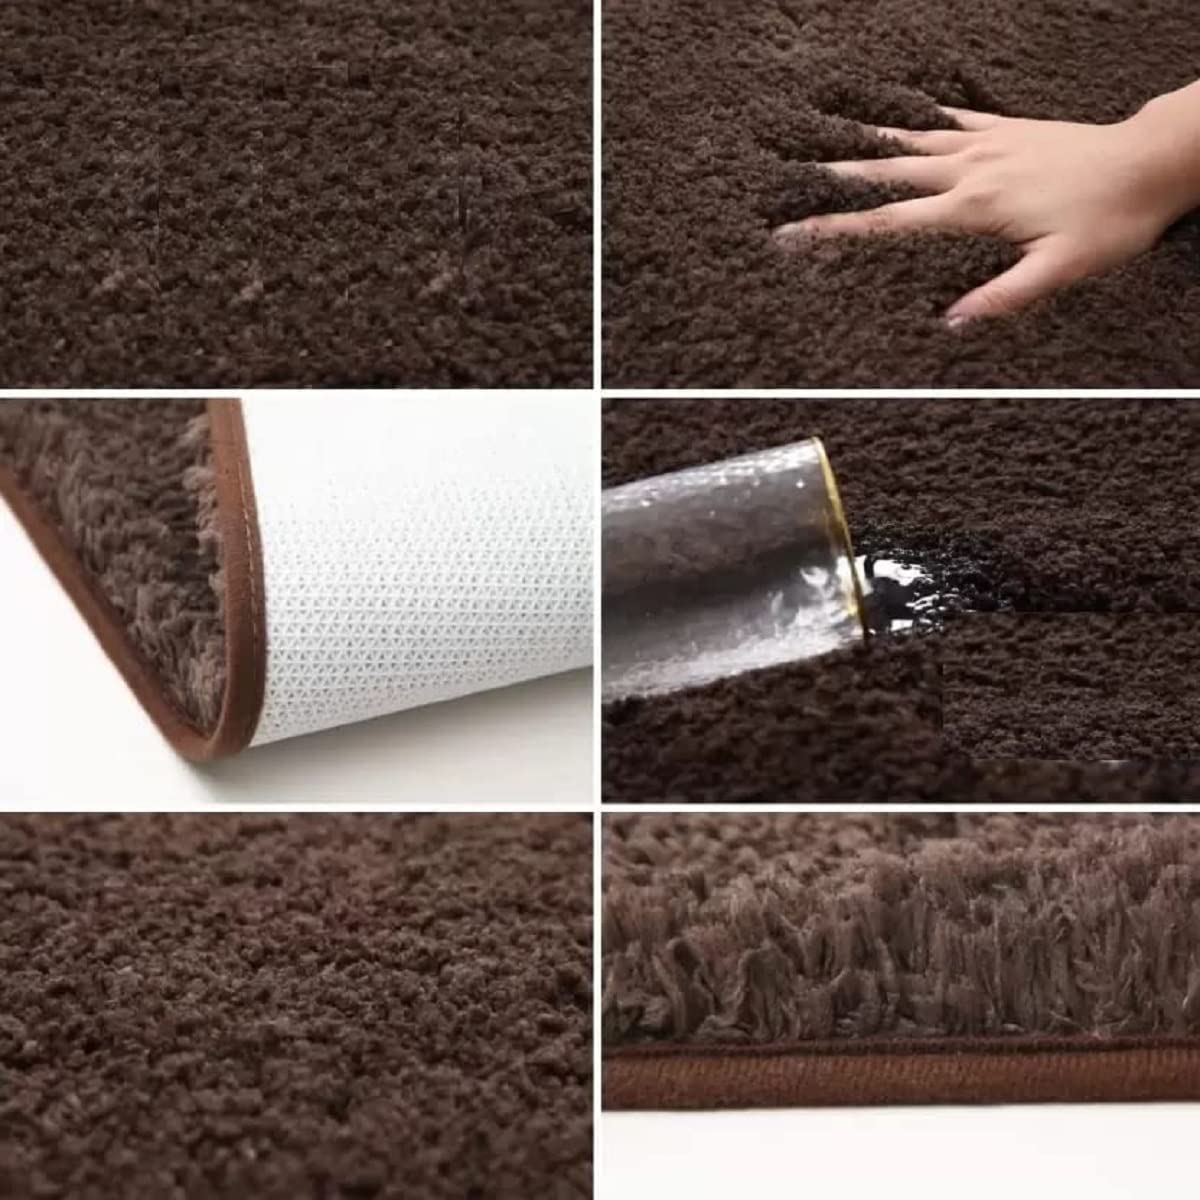 Bathroom Anti-slip Soft and Comfortable Quickly Absorb Water Machine Washable Design Bedroom Mats